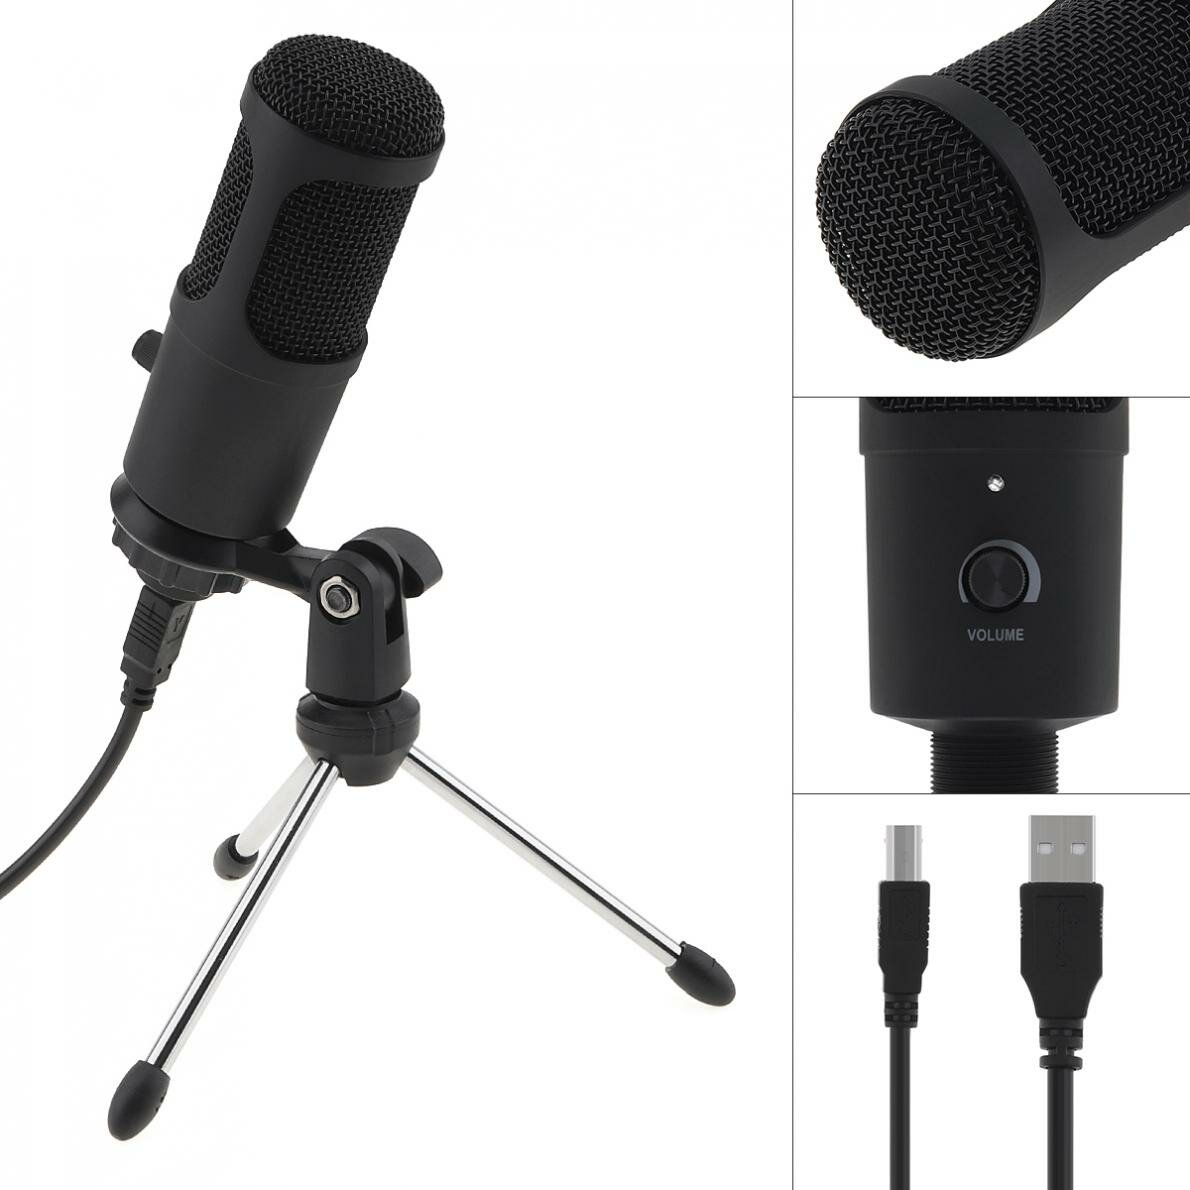 Bakeey A6 Metal USB Condenser Microphone Recording for Laptop Computer Windows Cardioid Recording Vo